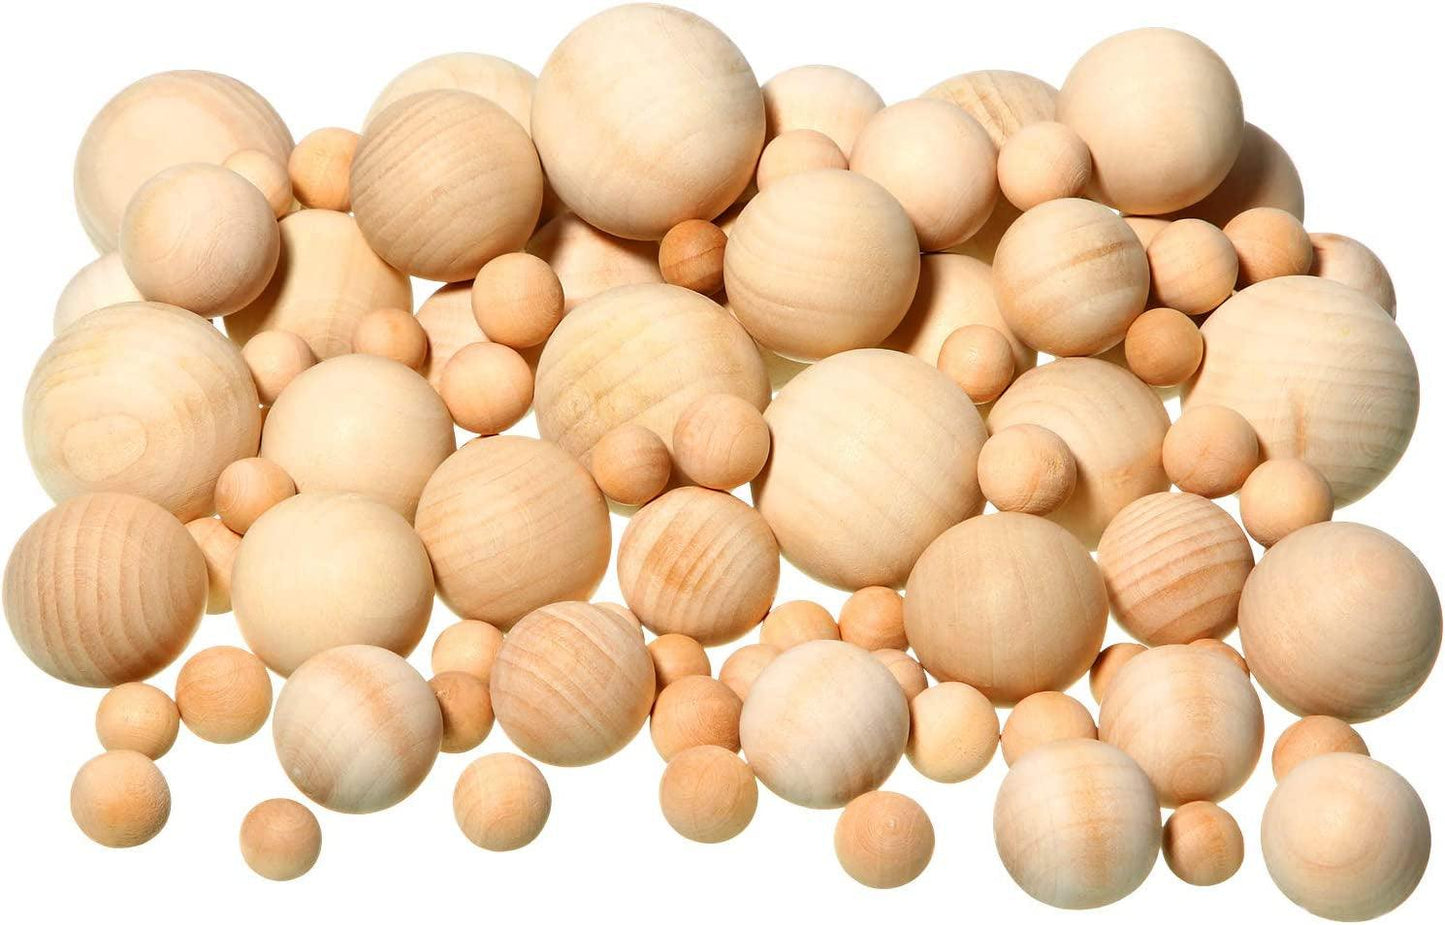 88 Pieces Wood Ball Wood Craft Balls Unfinished round Wooden Balls for DIY Craft Projects Jewelry Making Art Design in 5 Sizes - WoodArtSupply